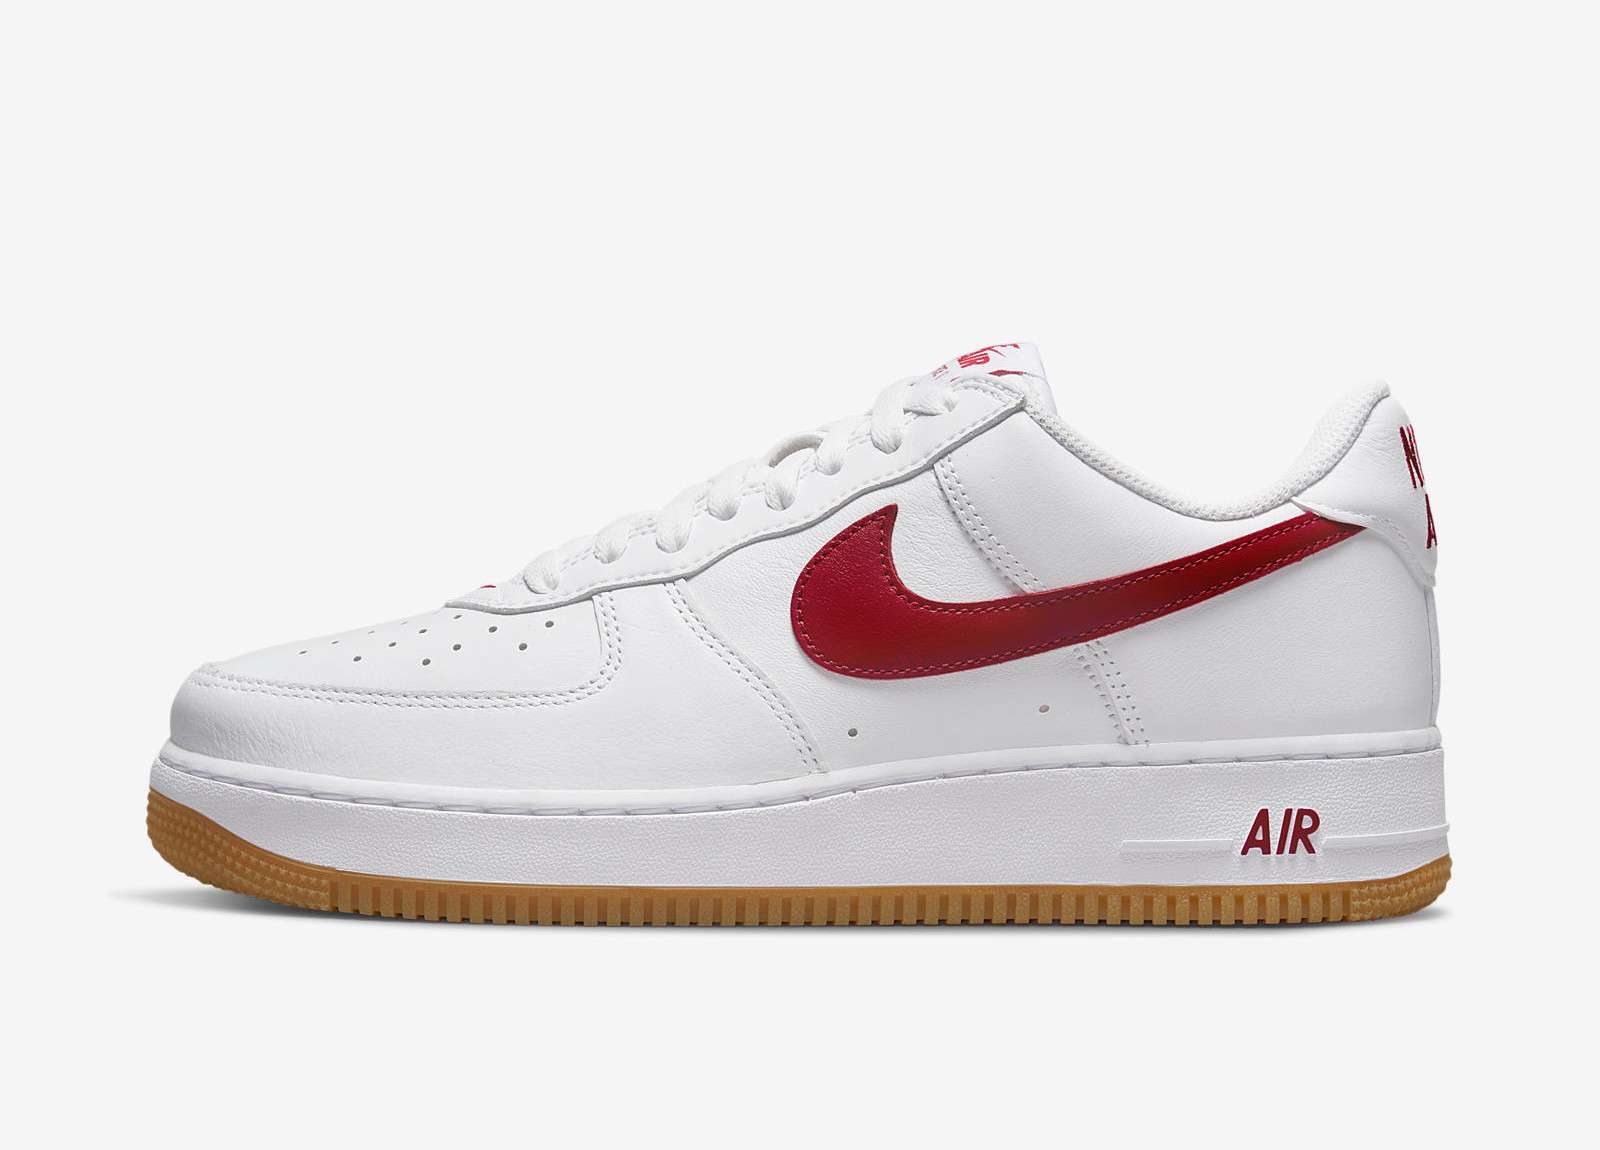 Nike Air Force 1 Low
Color of the Month
« University Red »